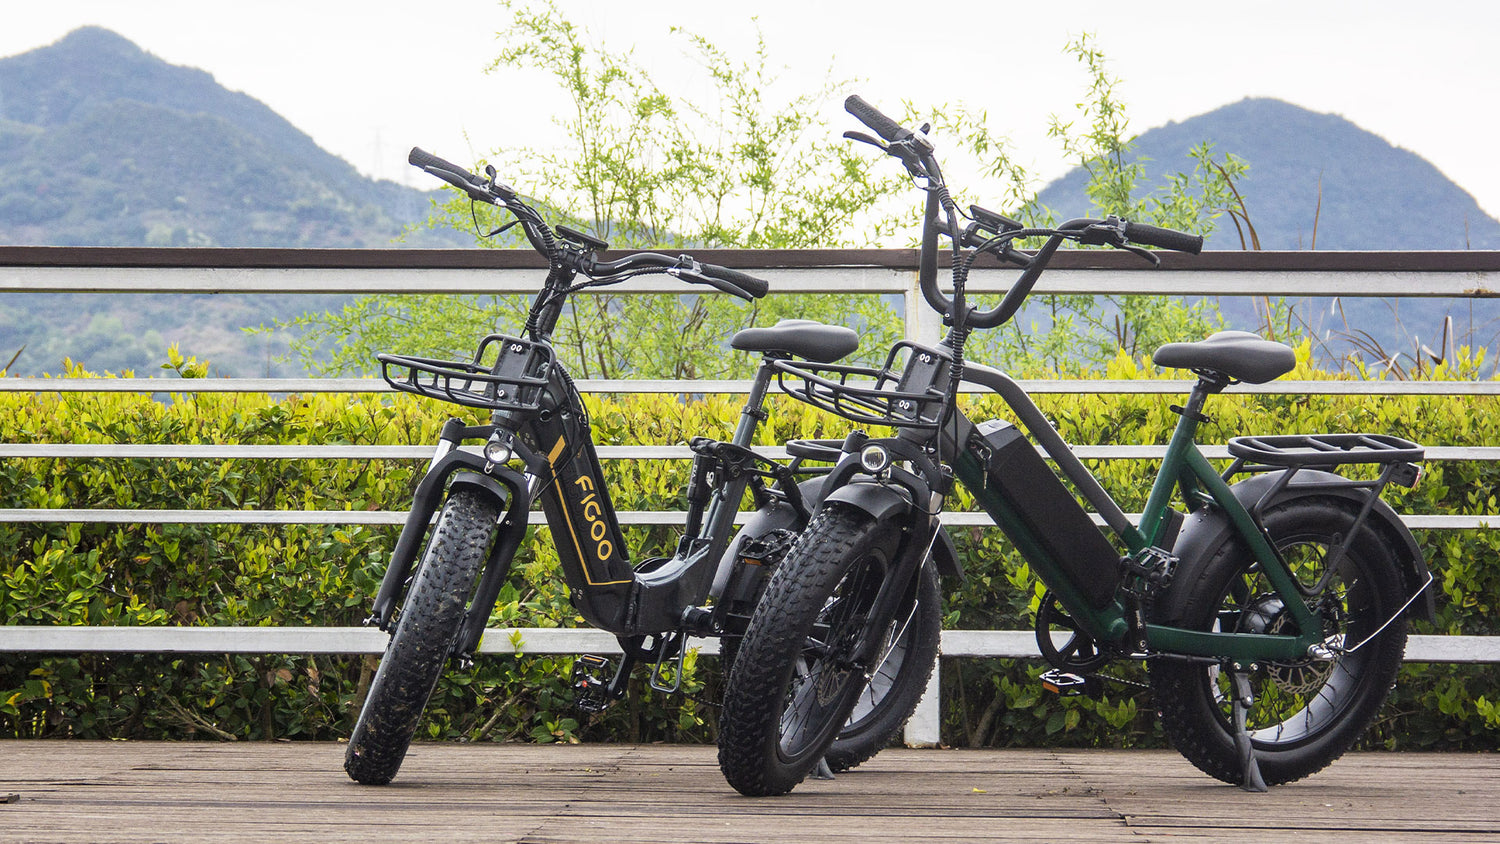 CT residents can receive up to $1,500 toward e-bikes. Here's how the program works.